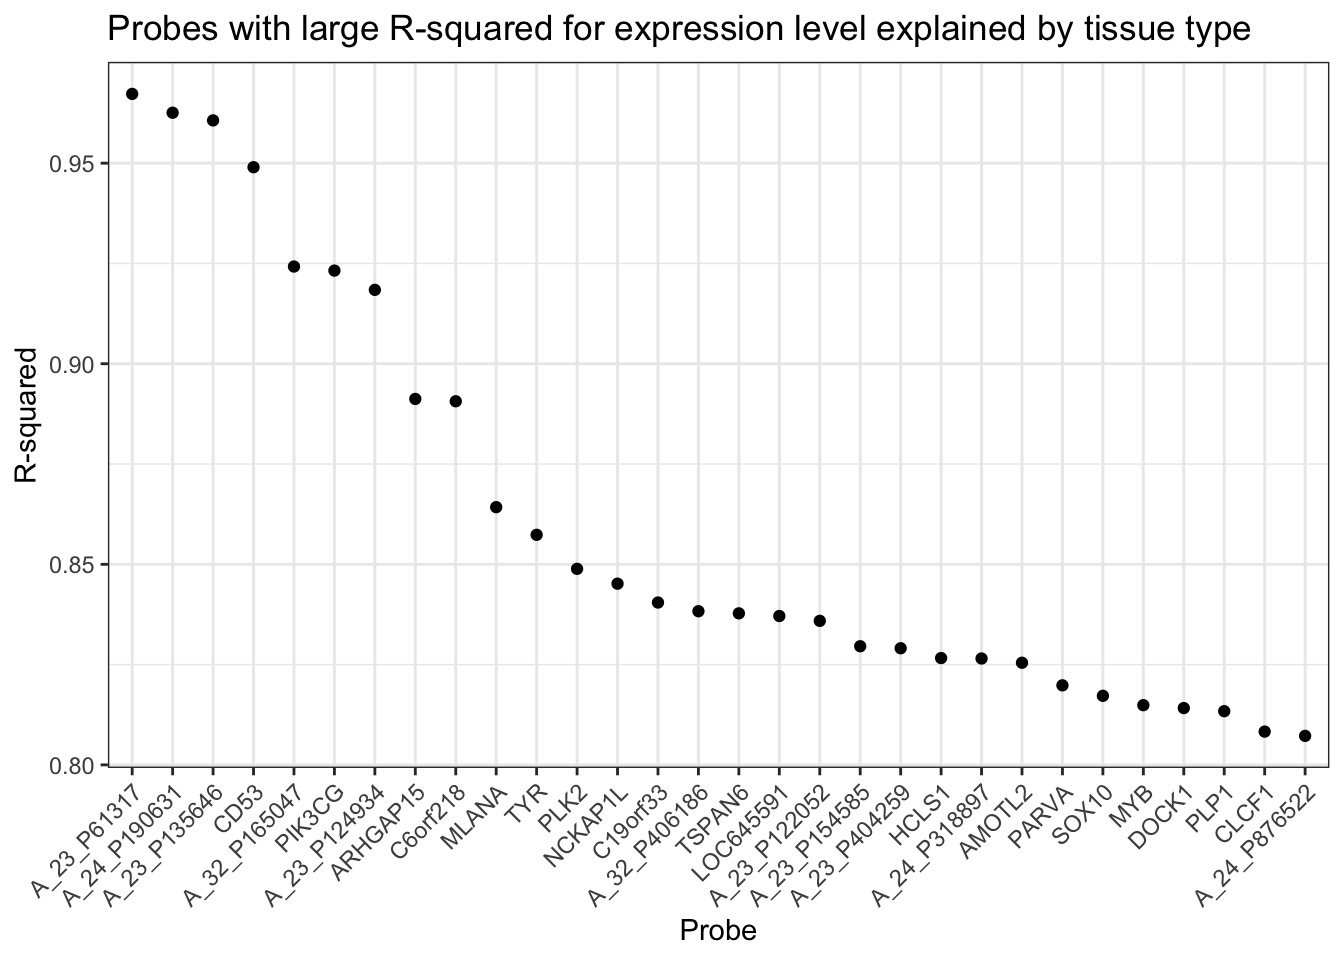 Probes with the largest \(R^2\) for expression level explained by tissue type.